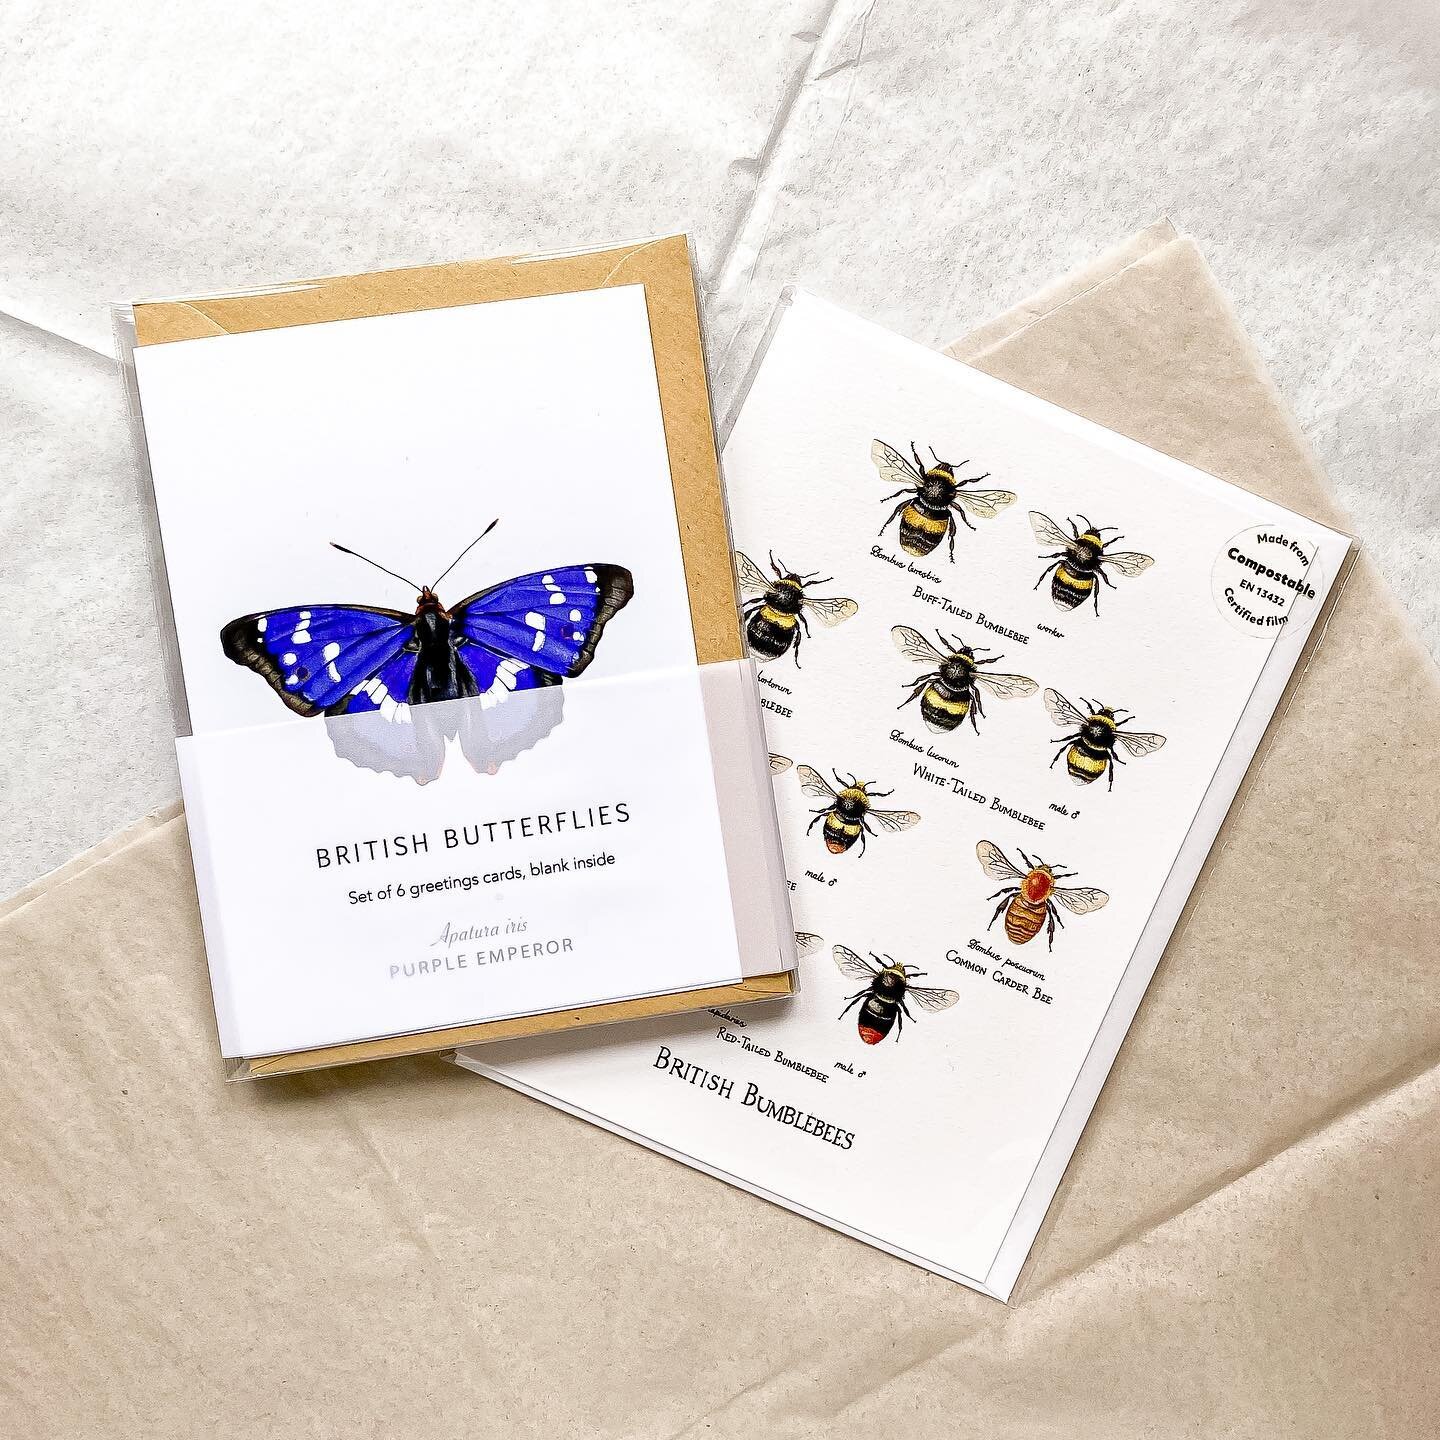 Butterfly and bumblebee cards are ready to buy from my new Etsy shop 🦋🐝 (link in bio!) They come in fully compostable sleeves and recycled paper packaging 🌱
.
P.S they look good in a frame too 🖼 
.
.
.
.
.
#etsy #bristolartist #bristoletsyteam #b